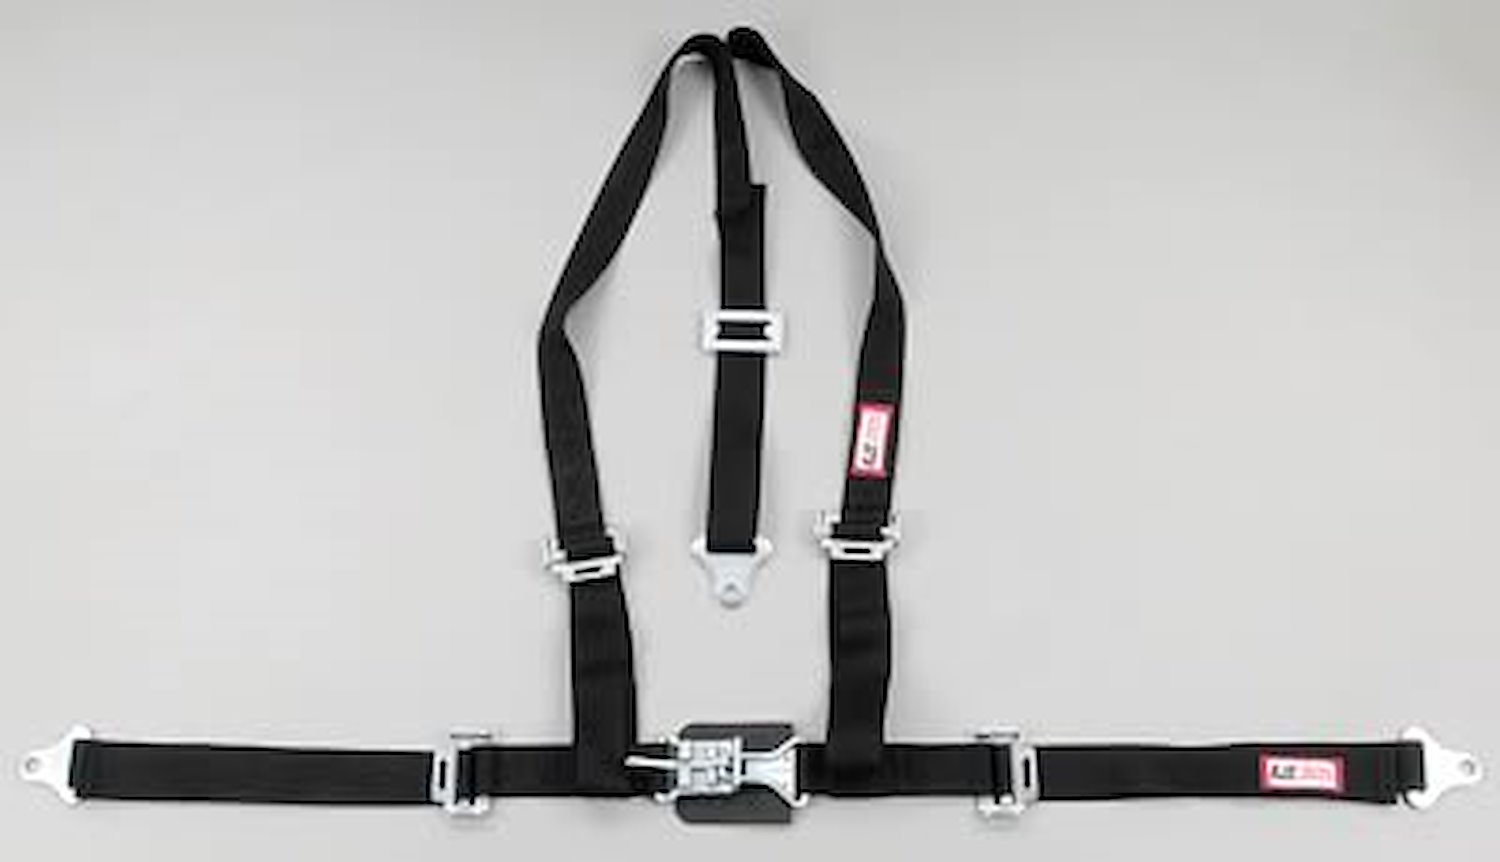 NON-SFI L&L HARNESS 2 PULL UP Lap Belt SEWN IN 2 S.H. V ROLL BAR Mount w/STERNUM STRAP ALL SNAP ENDS KHAKI